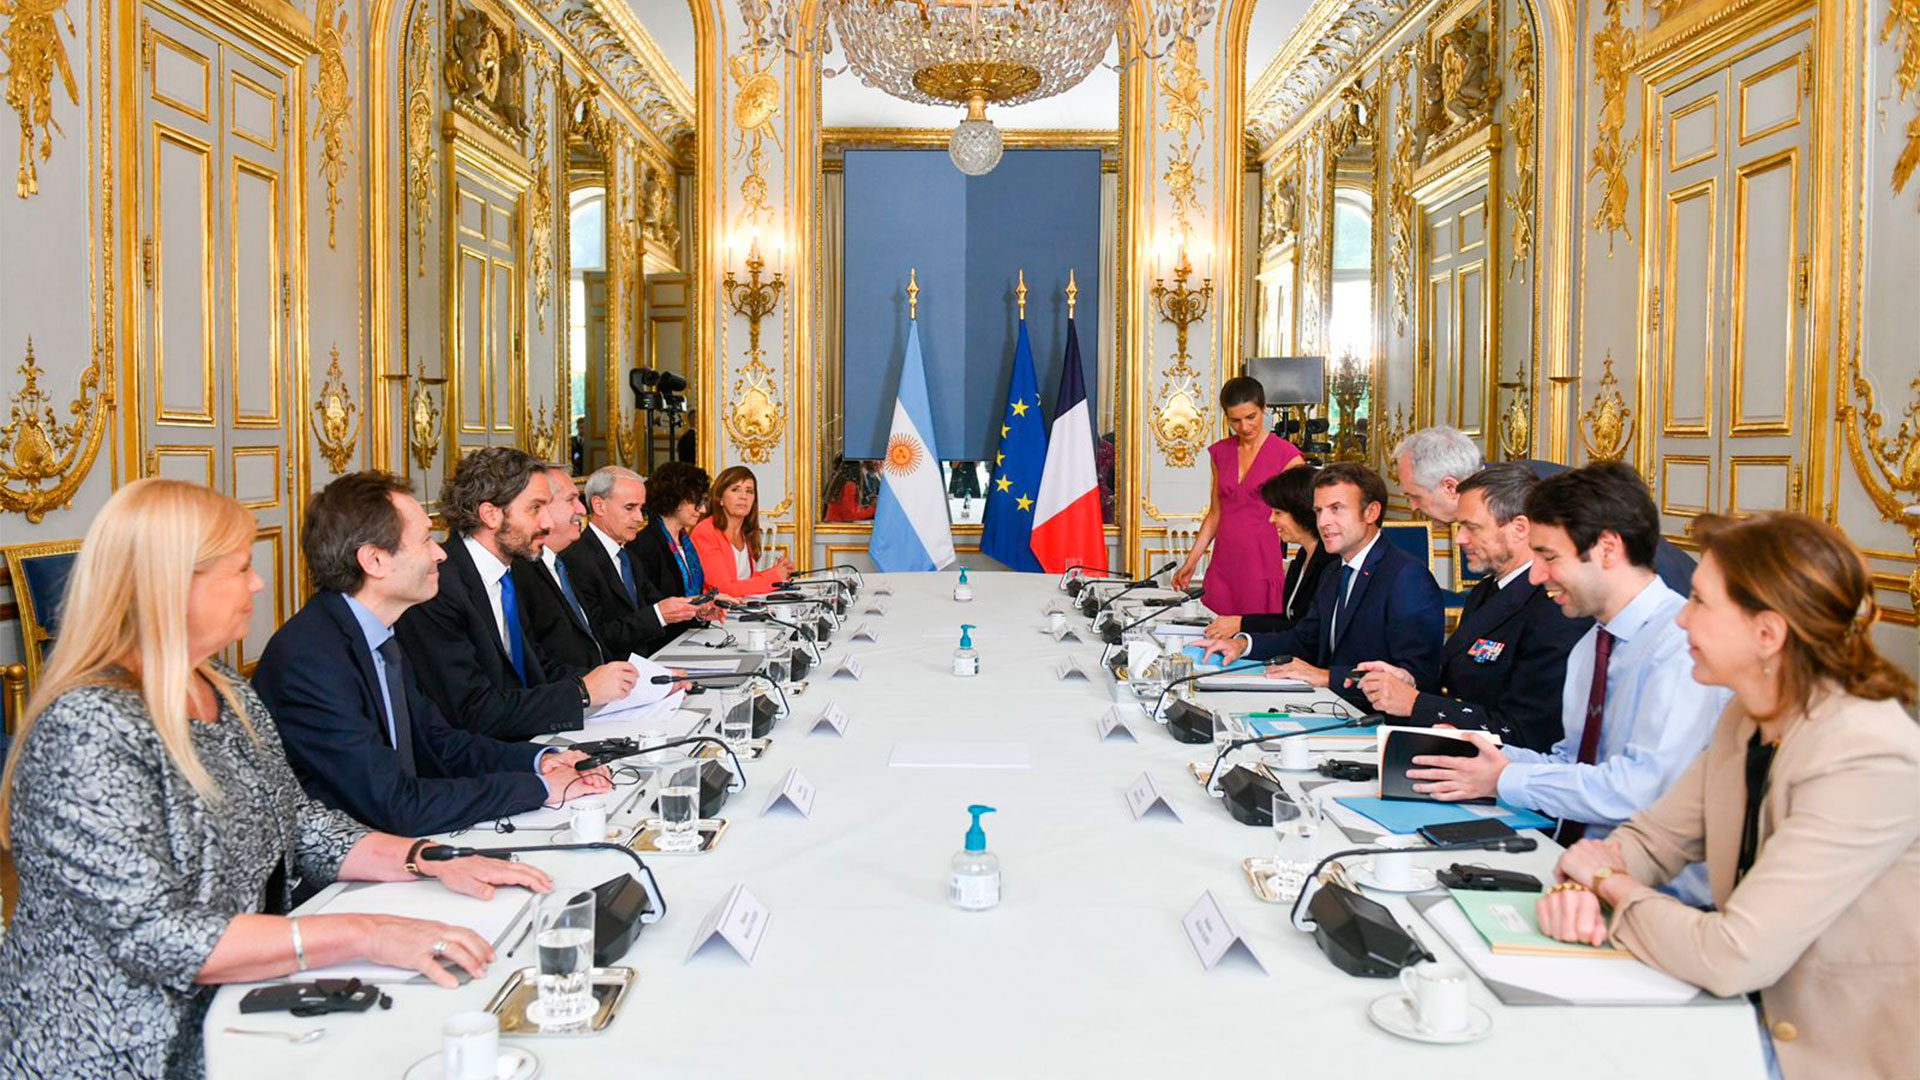 French President Emmanuel Macron leads the meeting with the Argentine delegation, which included Claudia Losardo, the former Minister of Justice who was assigned as ambassador to UNESCO when the friction between Alberto Fernández and Kirchnerism began